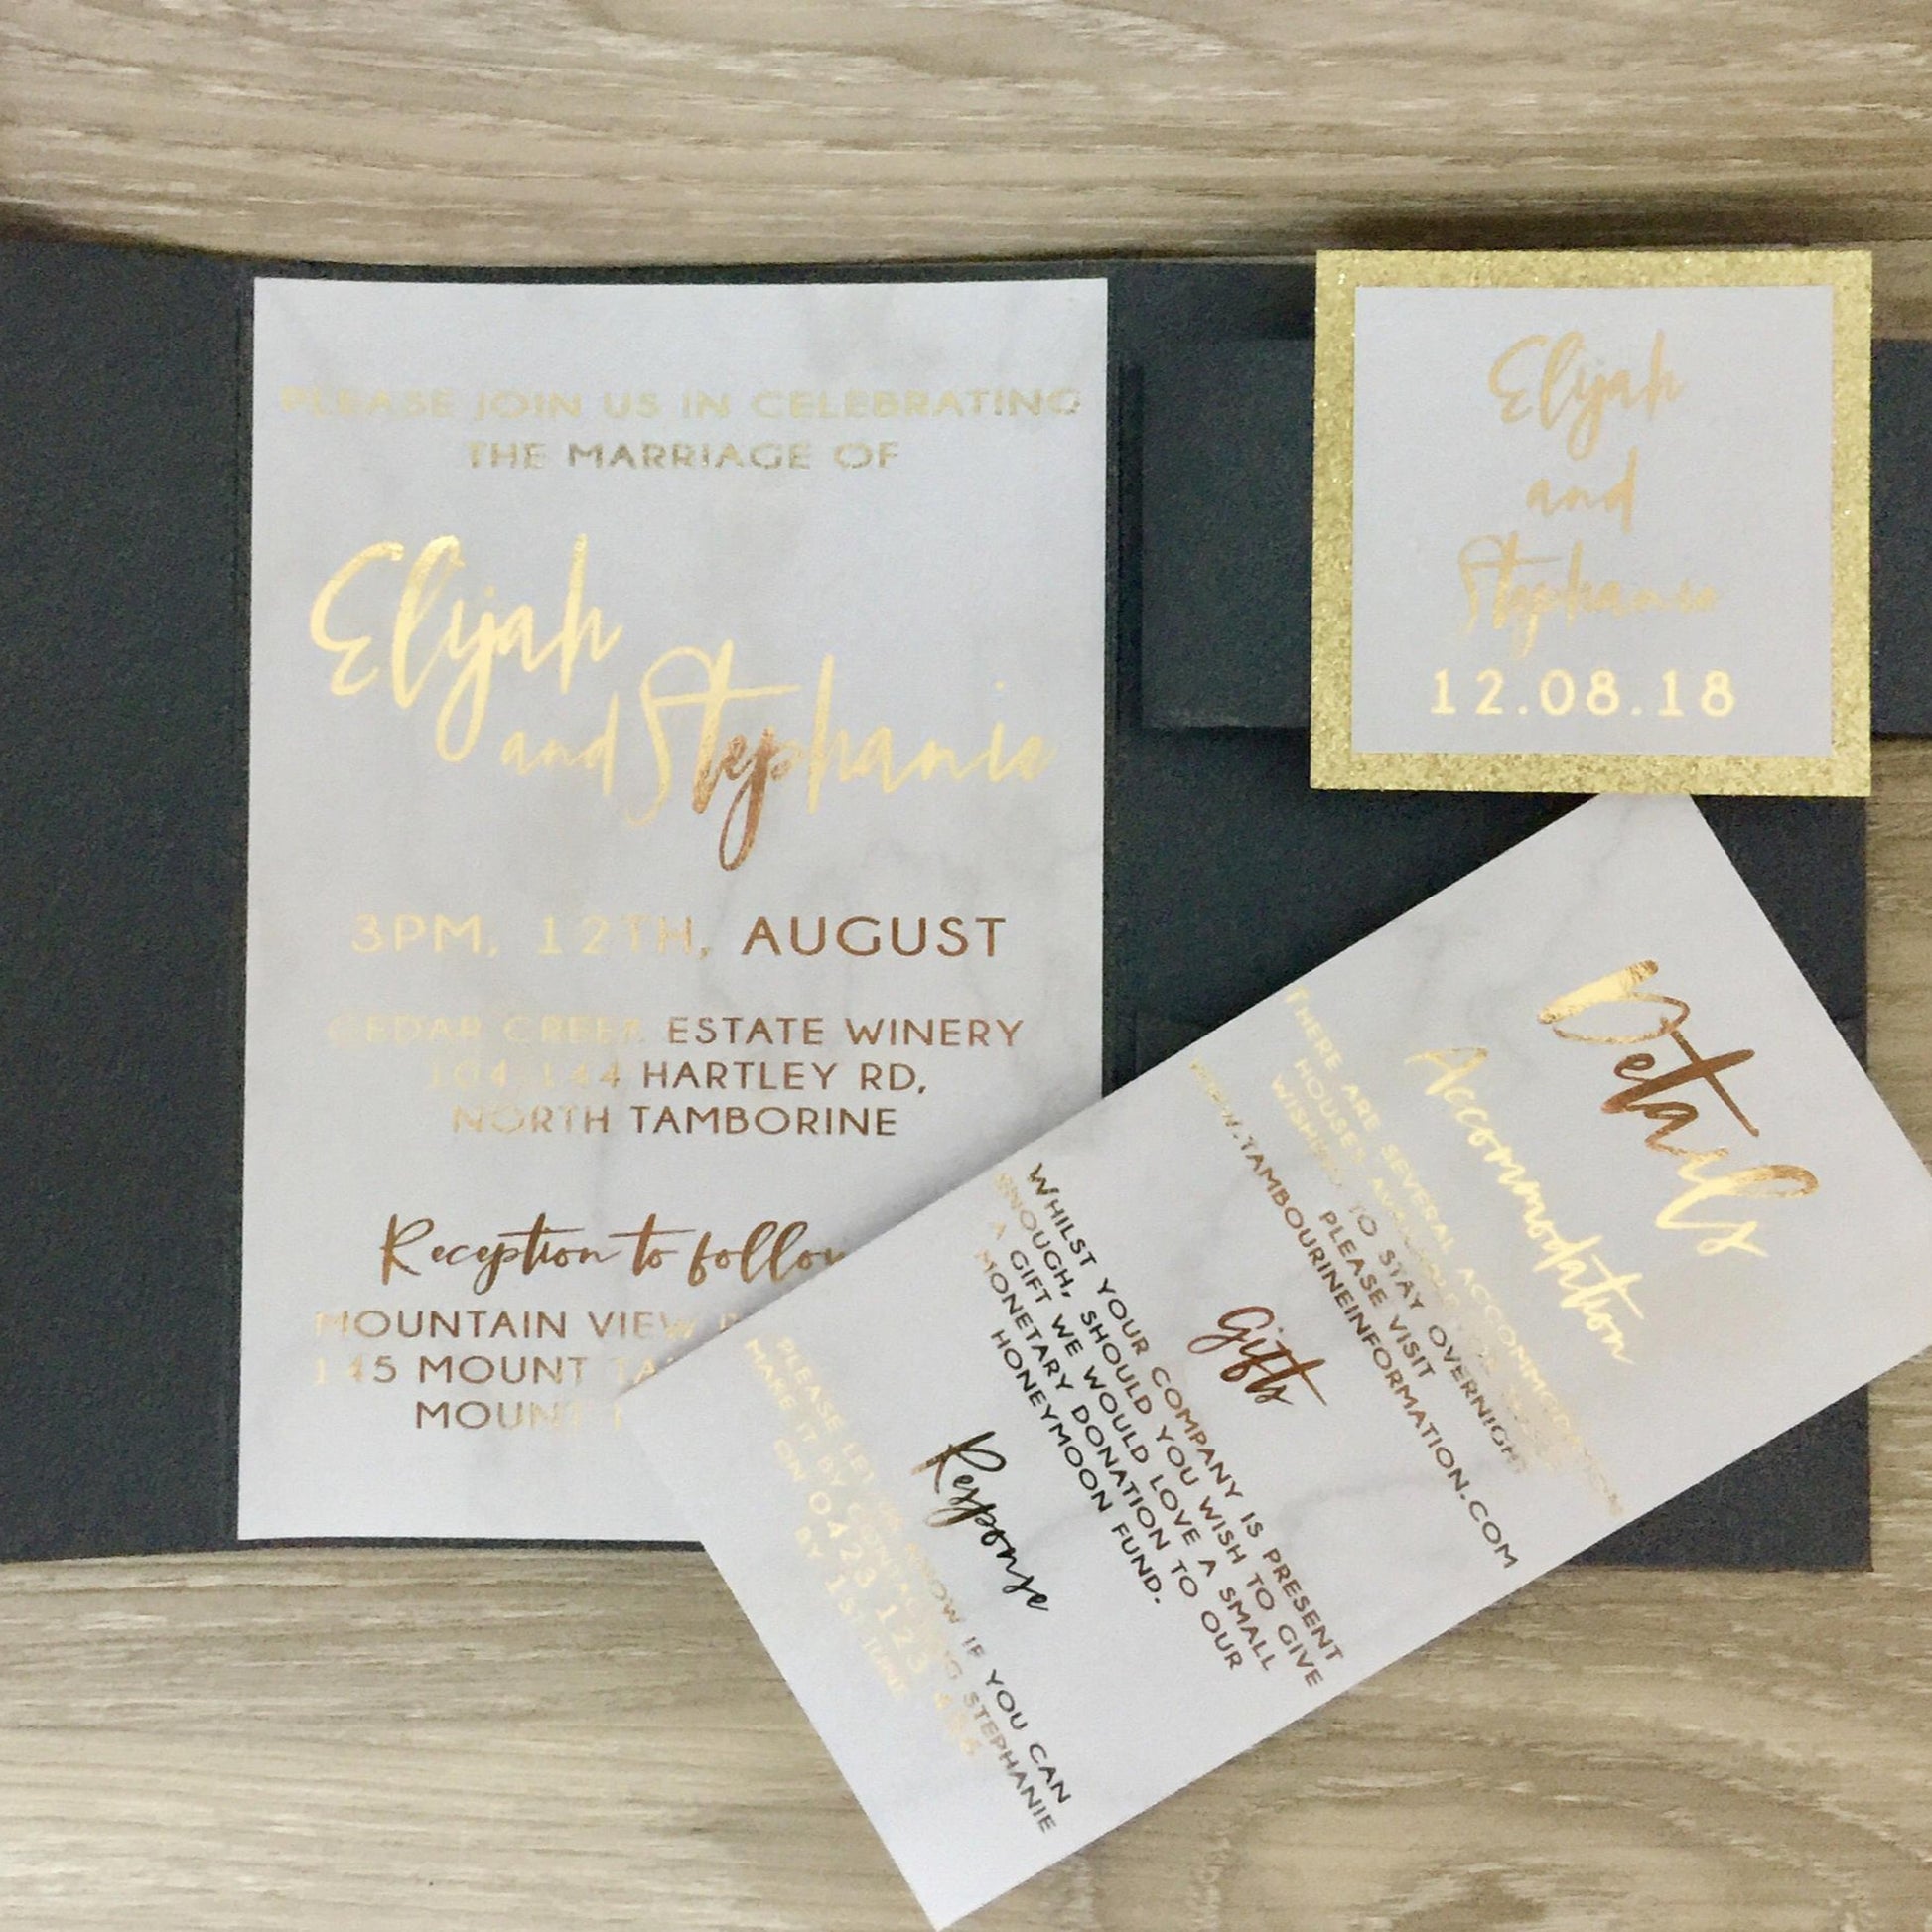 Black pocket fold wedding invitation with gold foil and marble detail